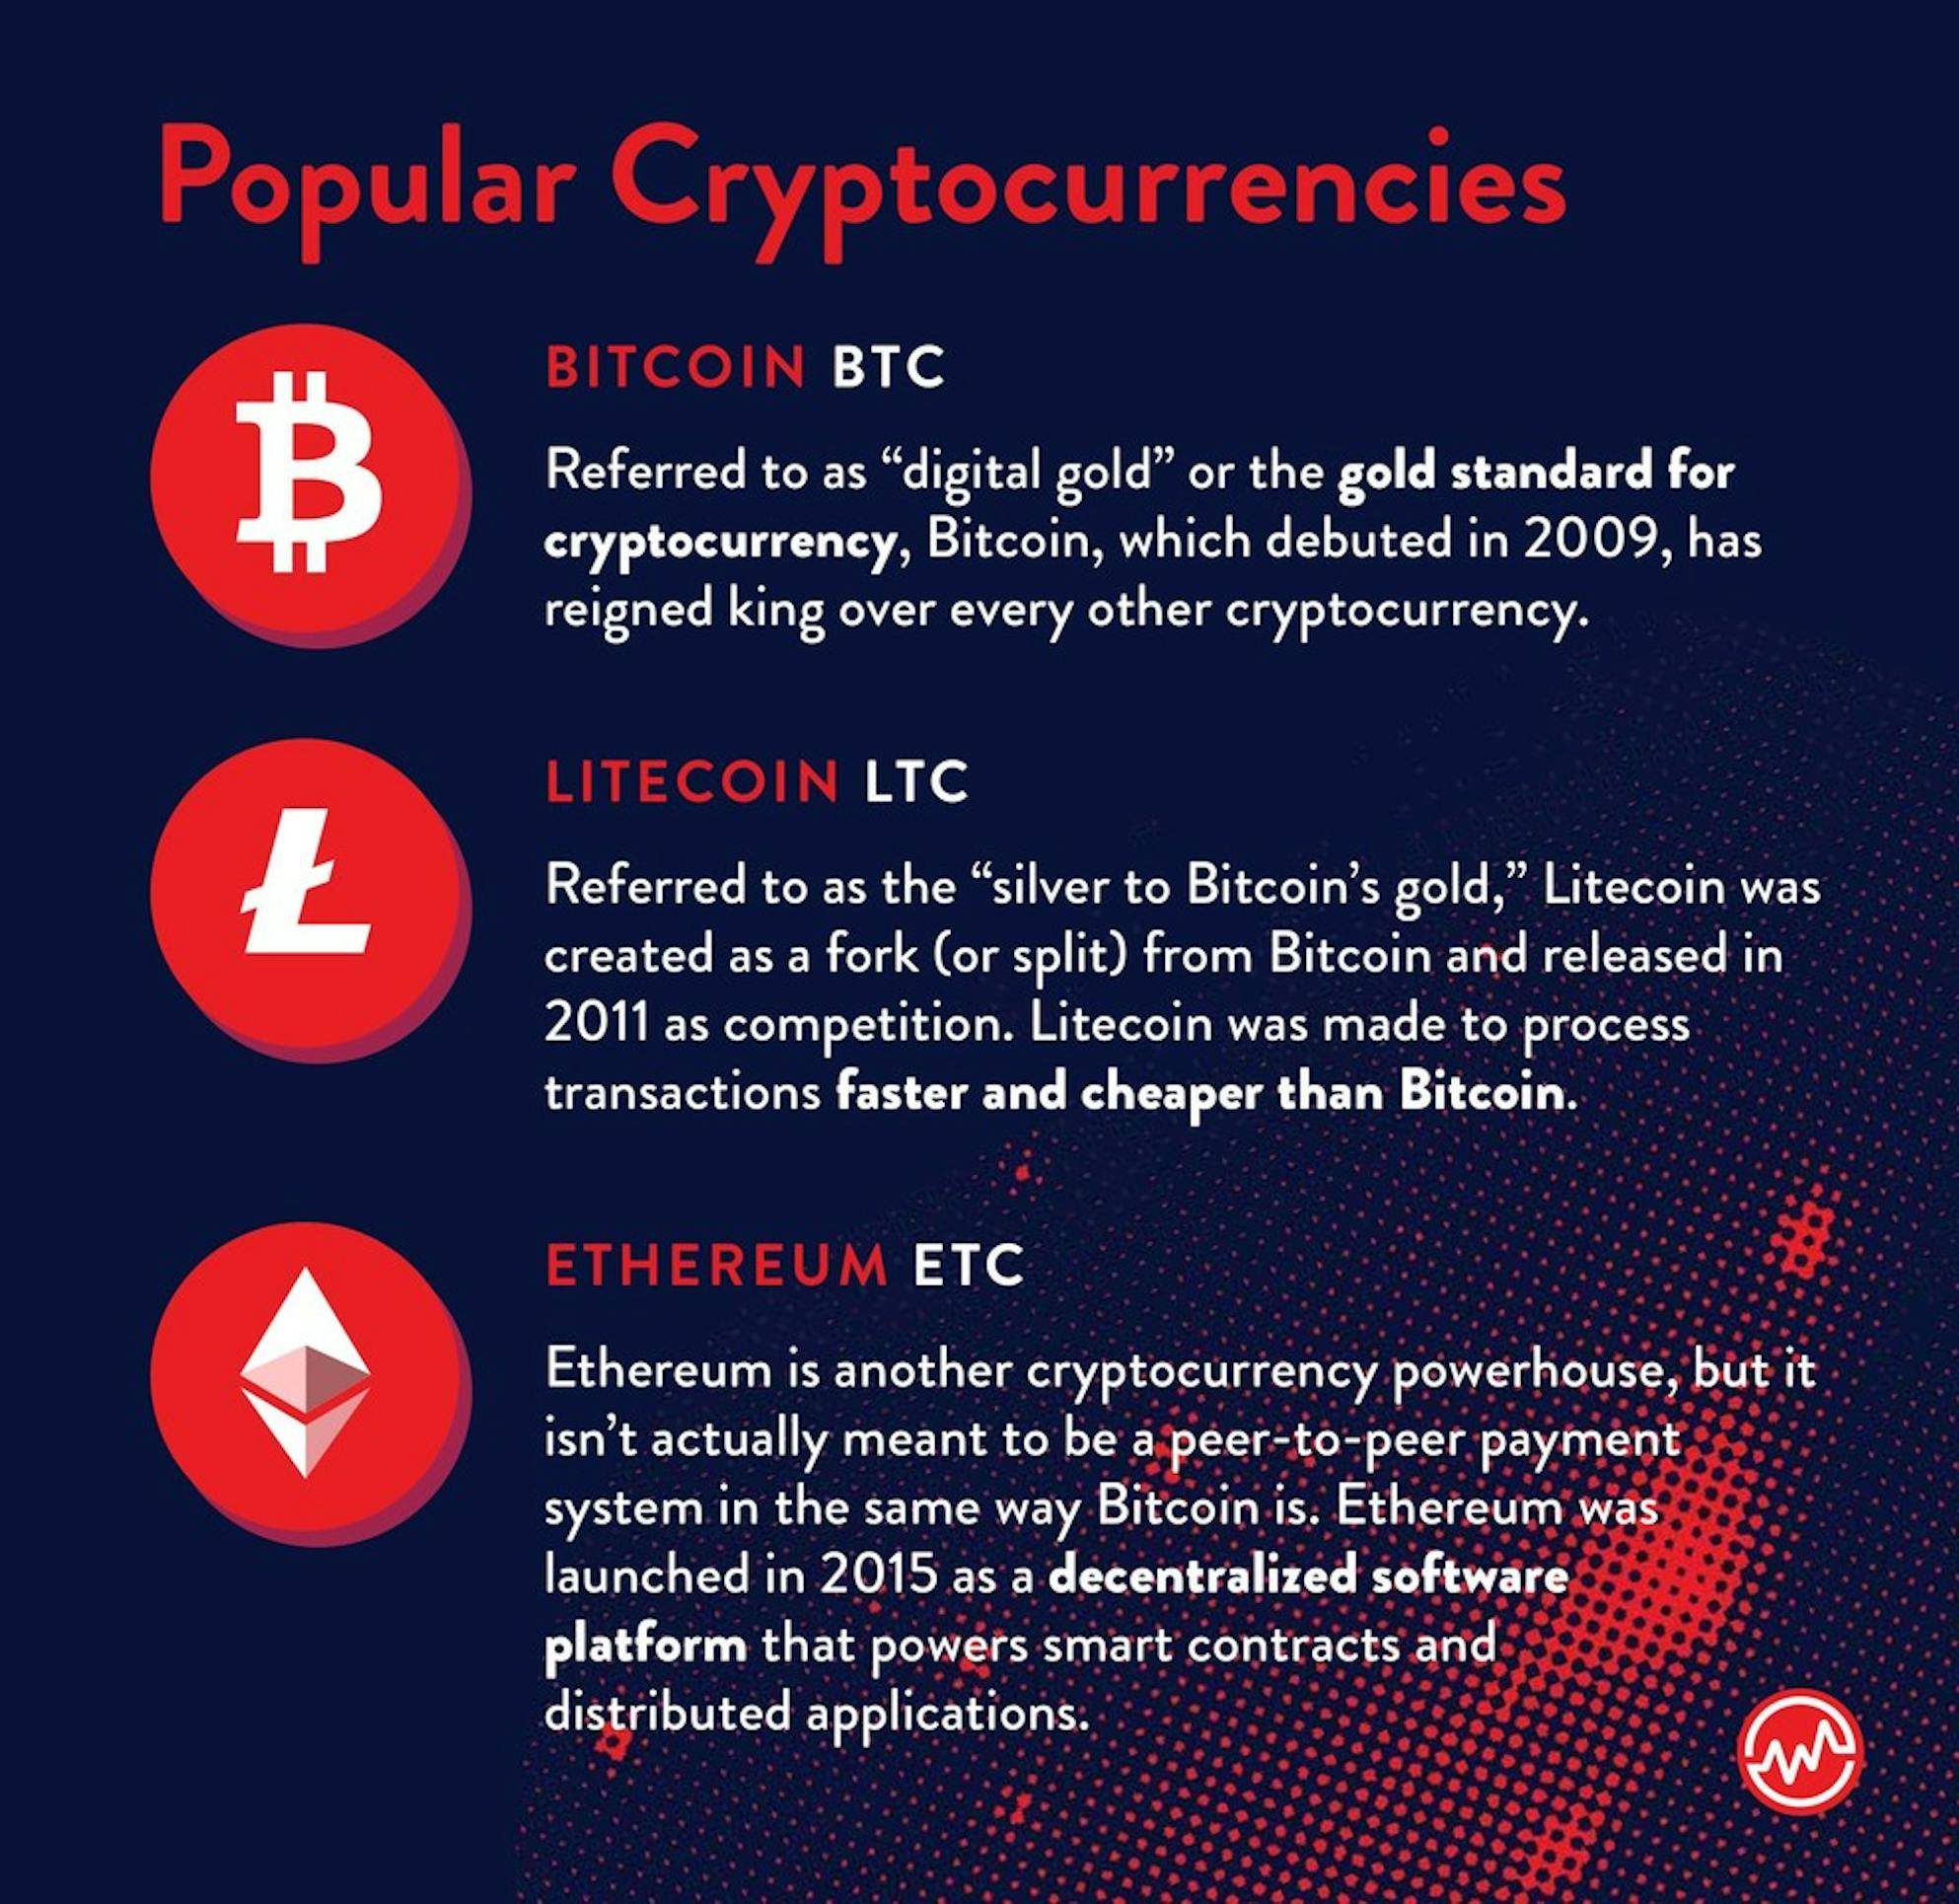 Populary Cryptocurrencies: Bitcoin, Litecoin and Etherum